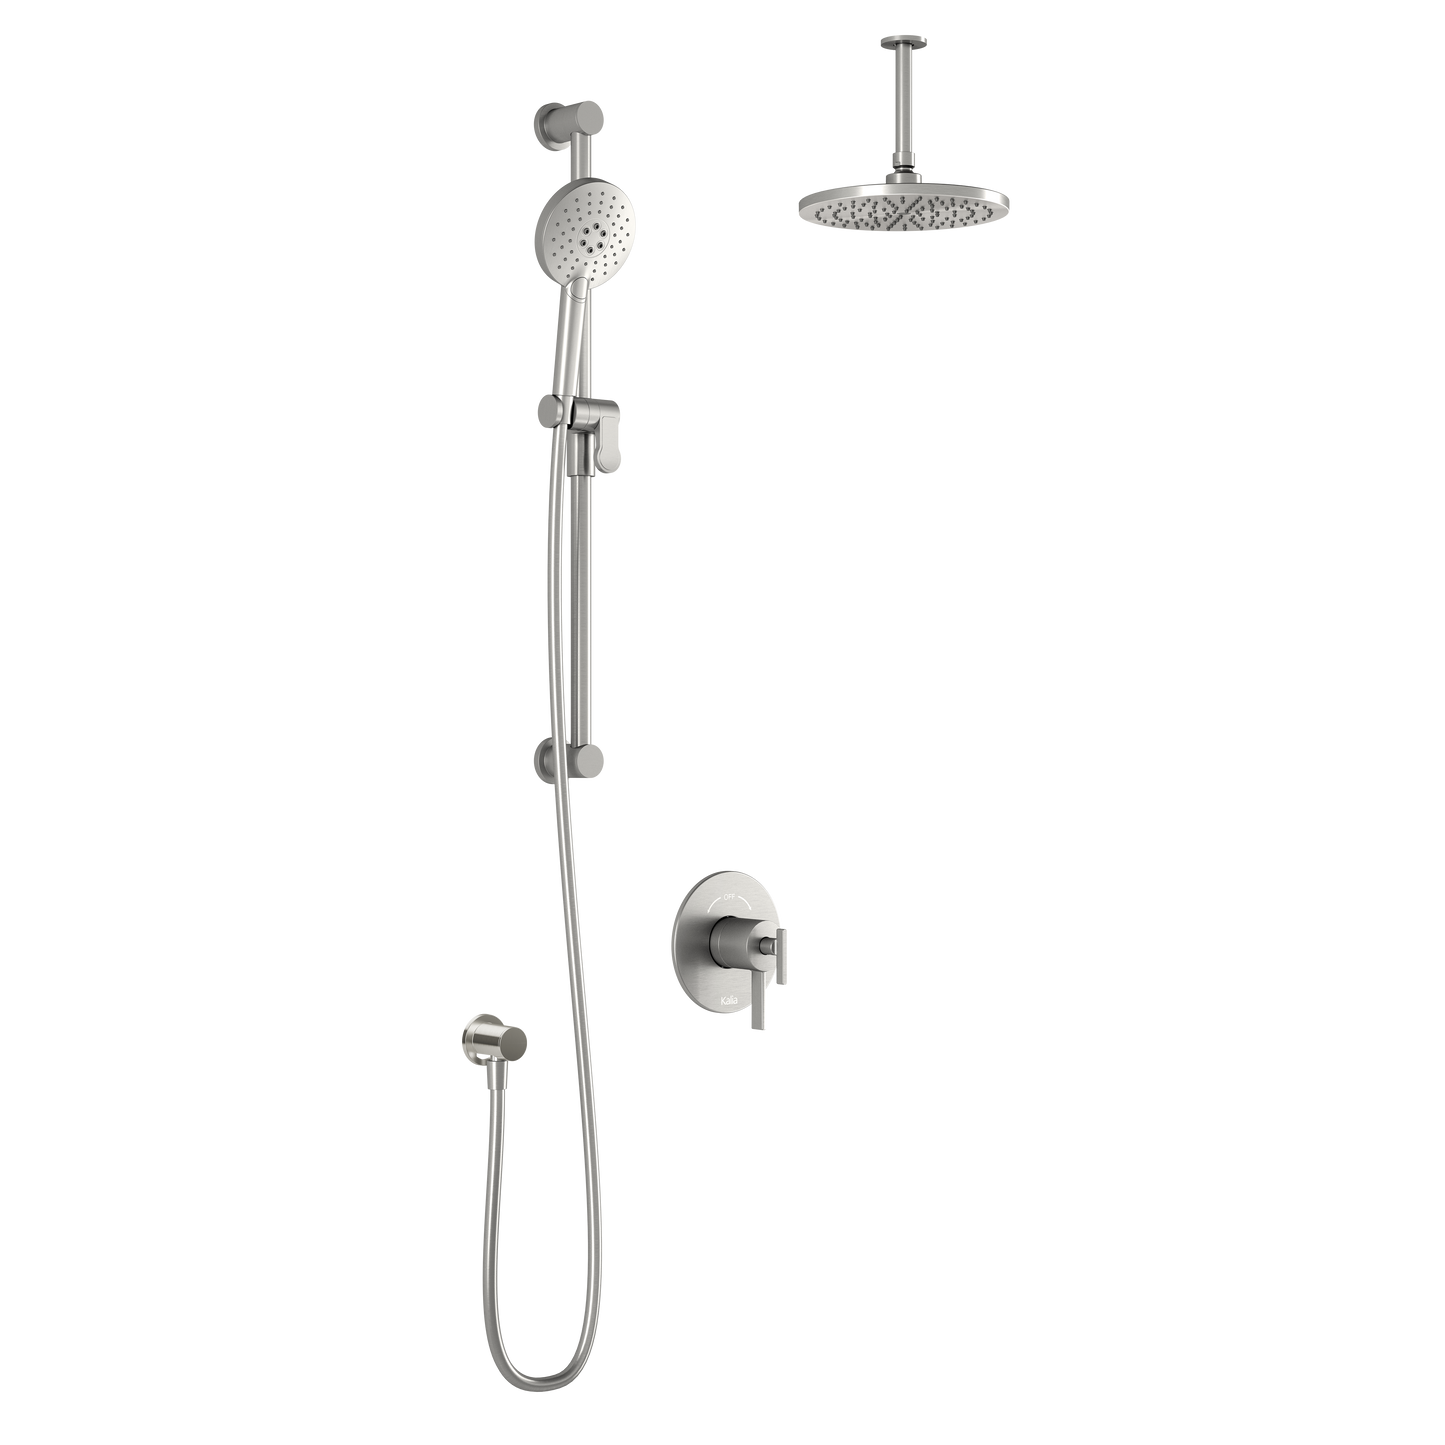 Kalia RoundOne TCD1 AQUATONIK T/P Coaxial Shower System with Vertical Ceiling Arm (BF1636-XX-001)